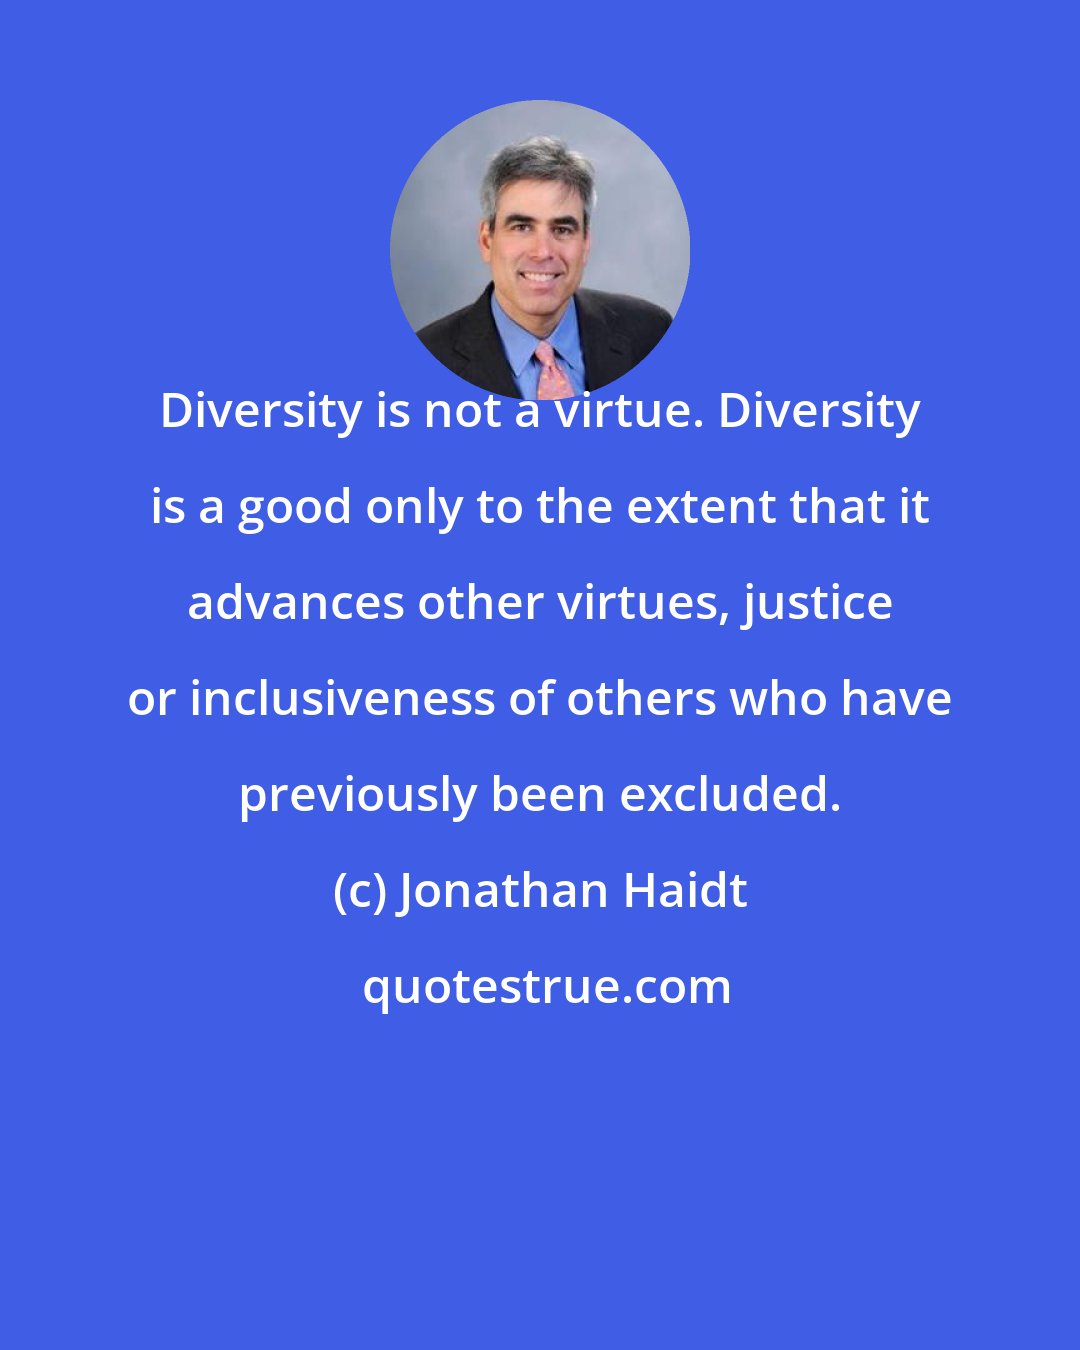 Jonathan Haidt: Diversity is not a virtue. Diversity is a good only to the extent that it advances other virtues, justice or inclusiveness of others who have previously been excluded.